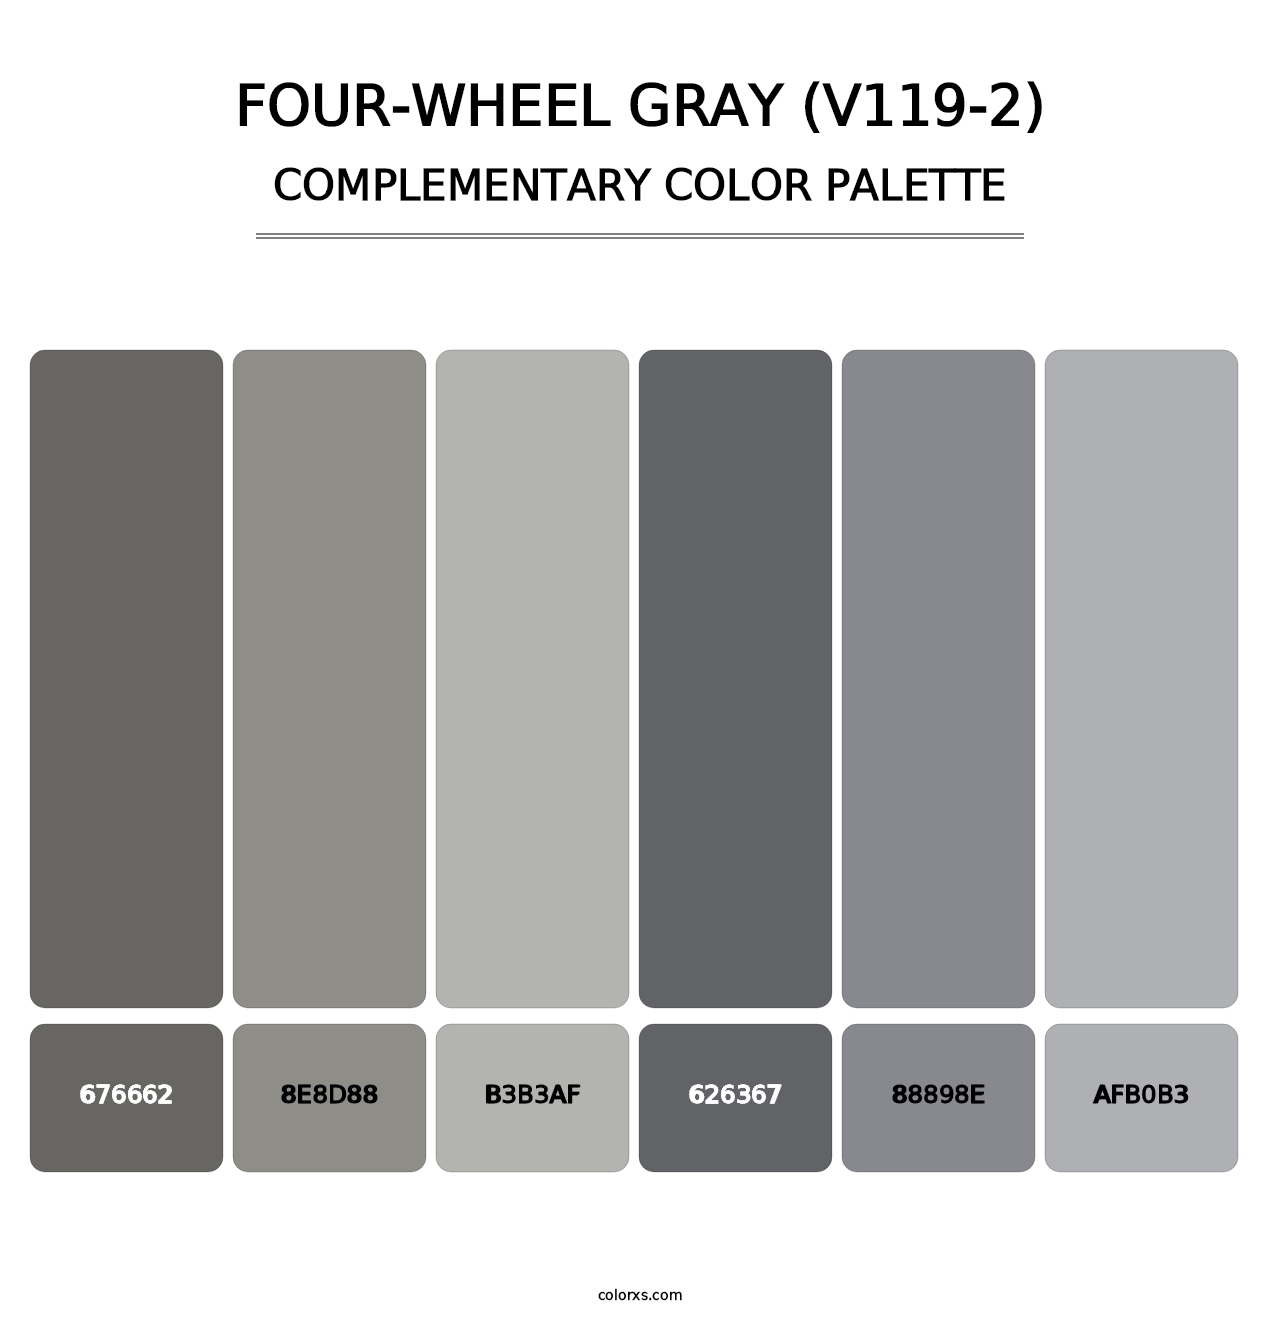 Four-Wheel Gray (V119-2) - Complementary Color Palette